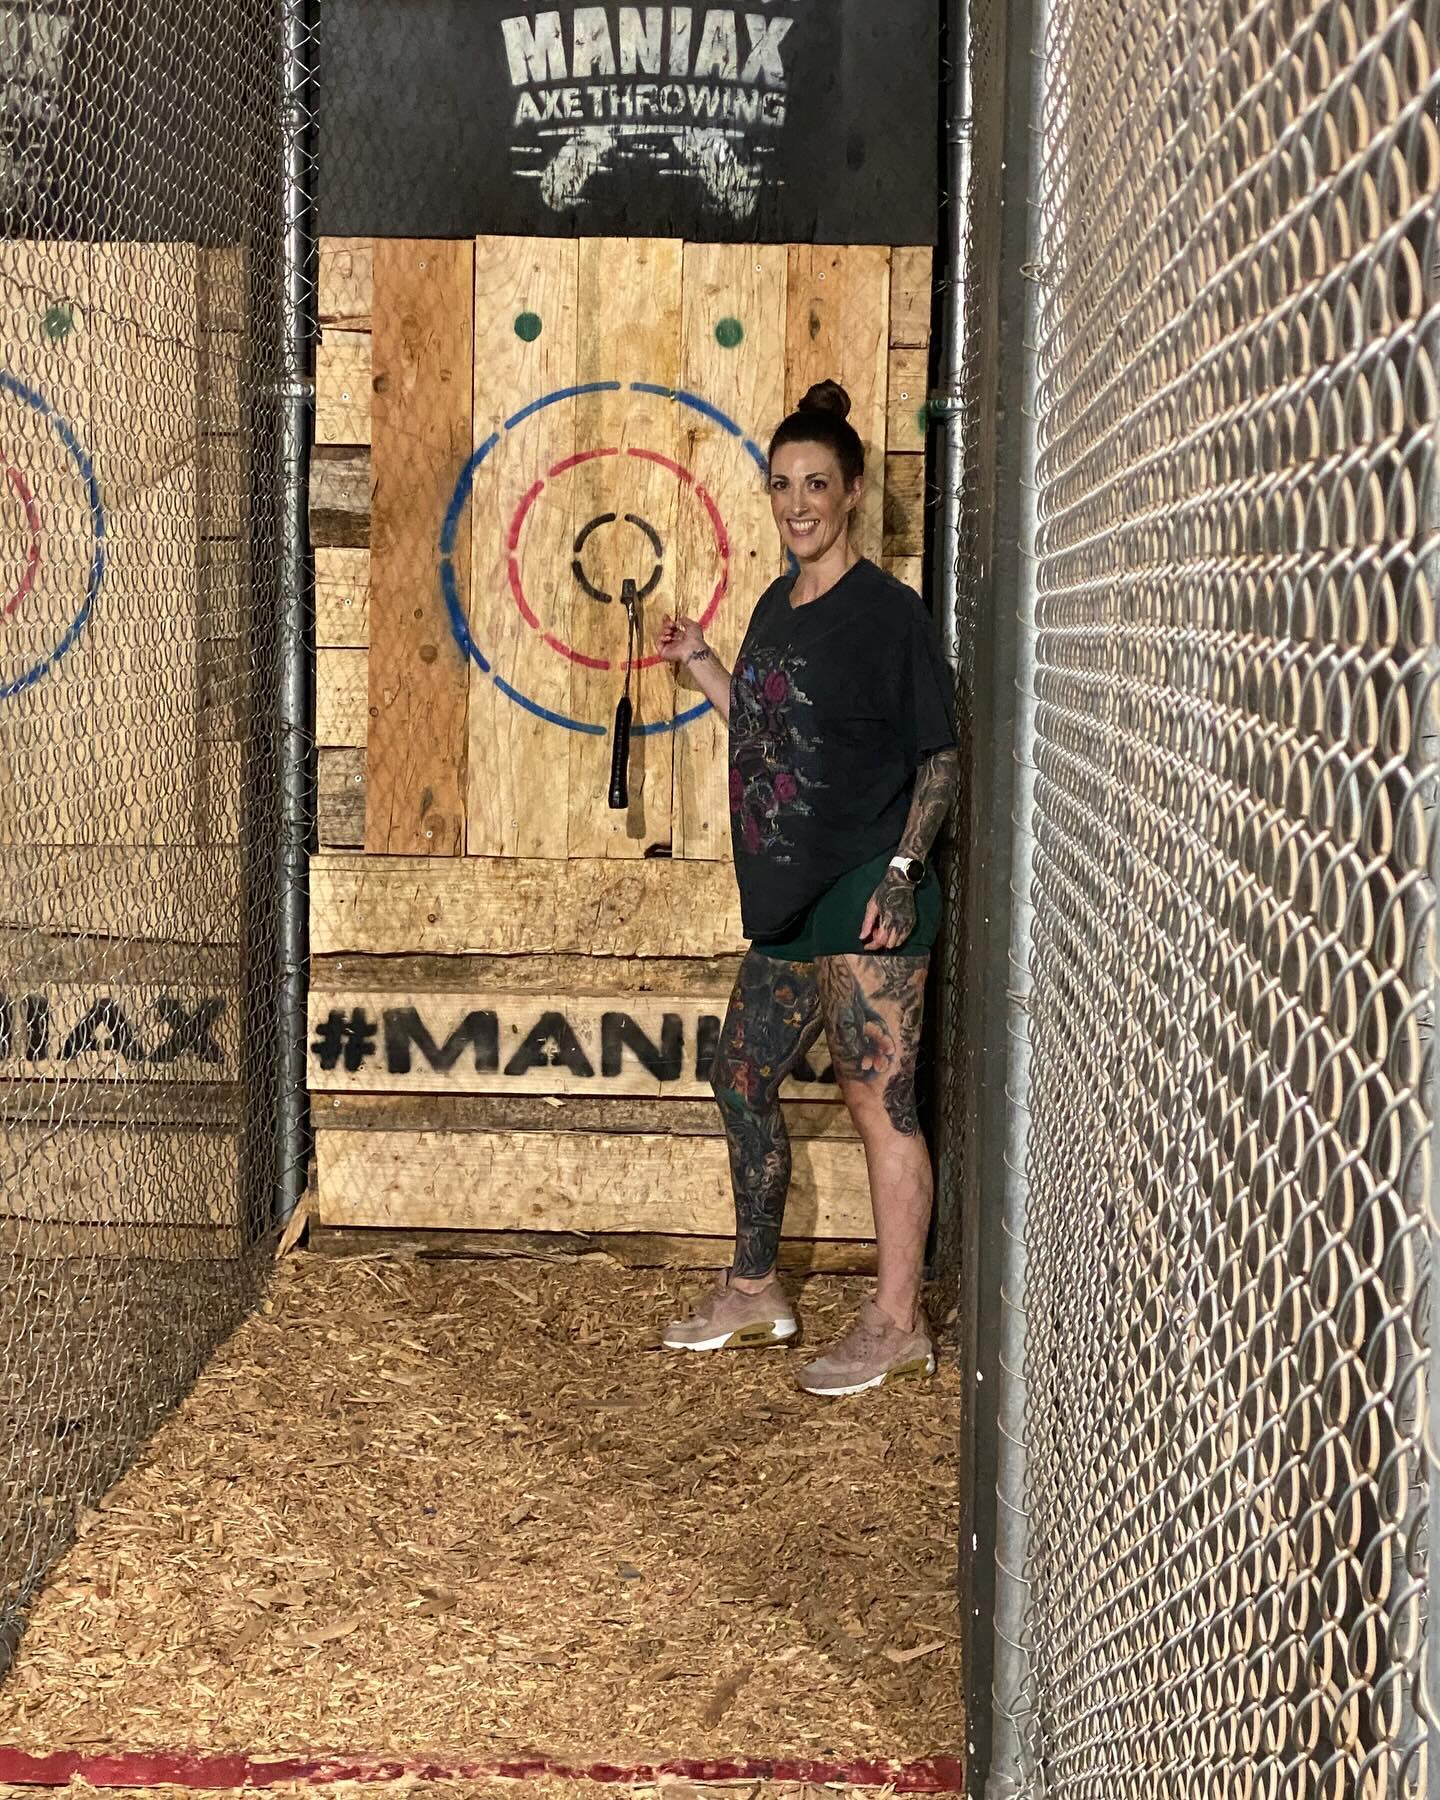 Fun morning in the city with the fam. Recommend the axe throwing @maniax.au  was good fun 🪓